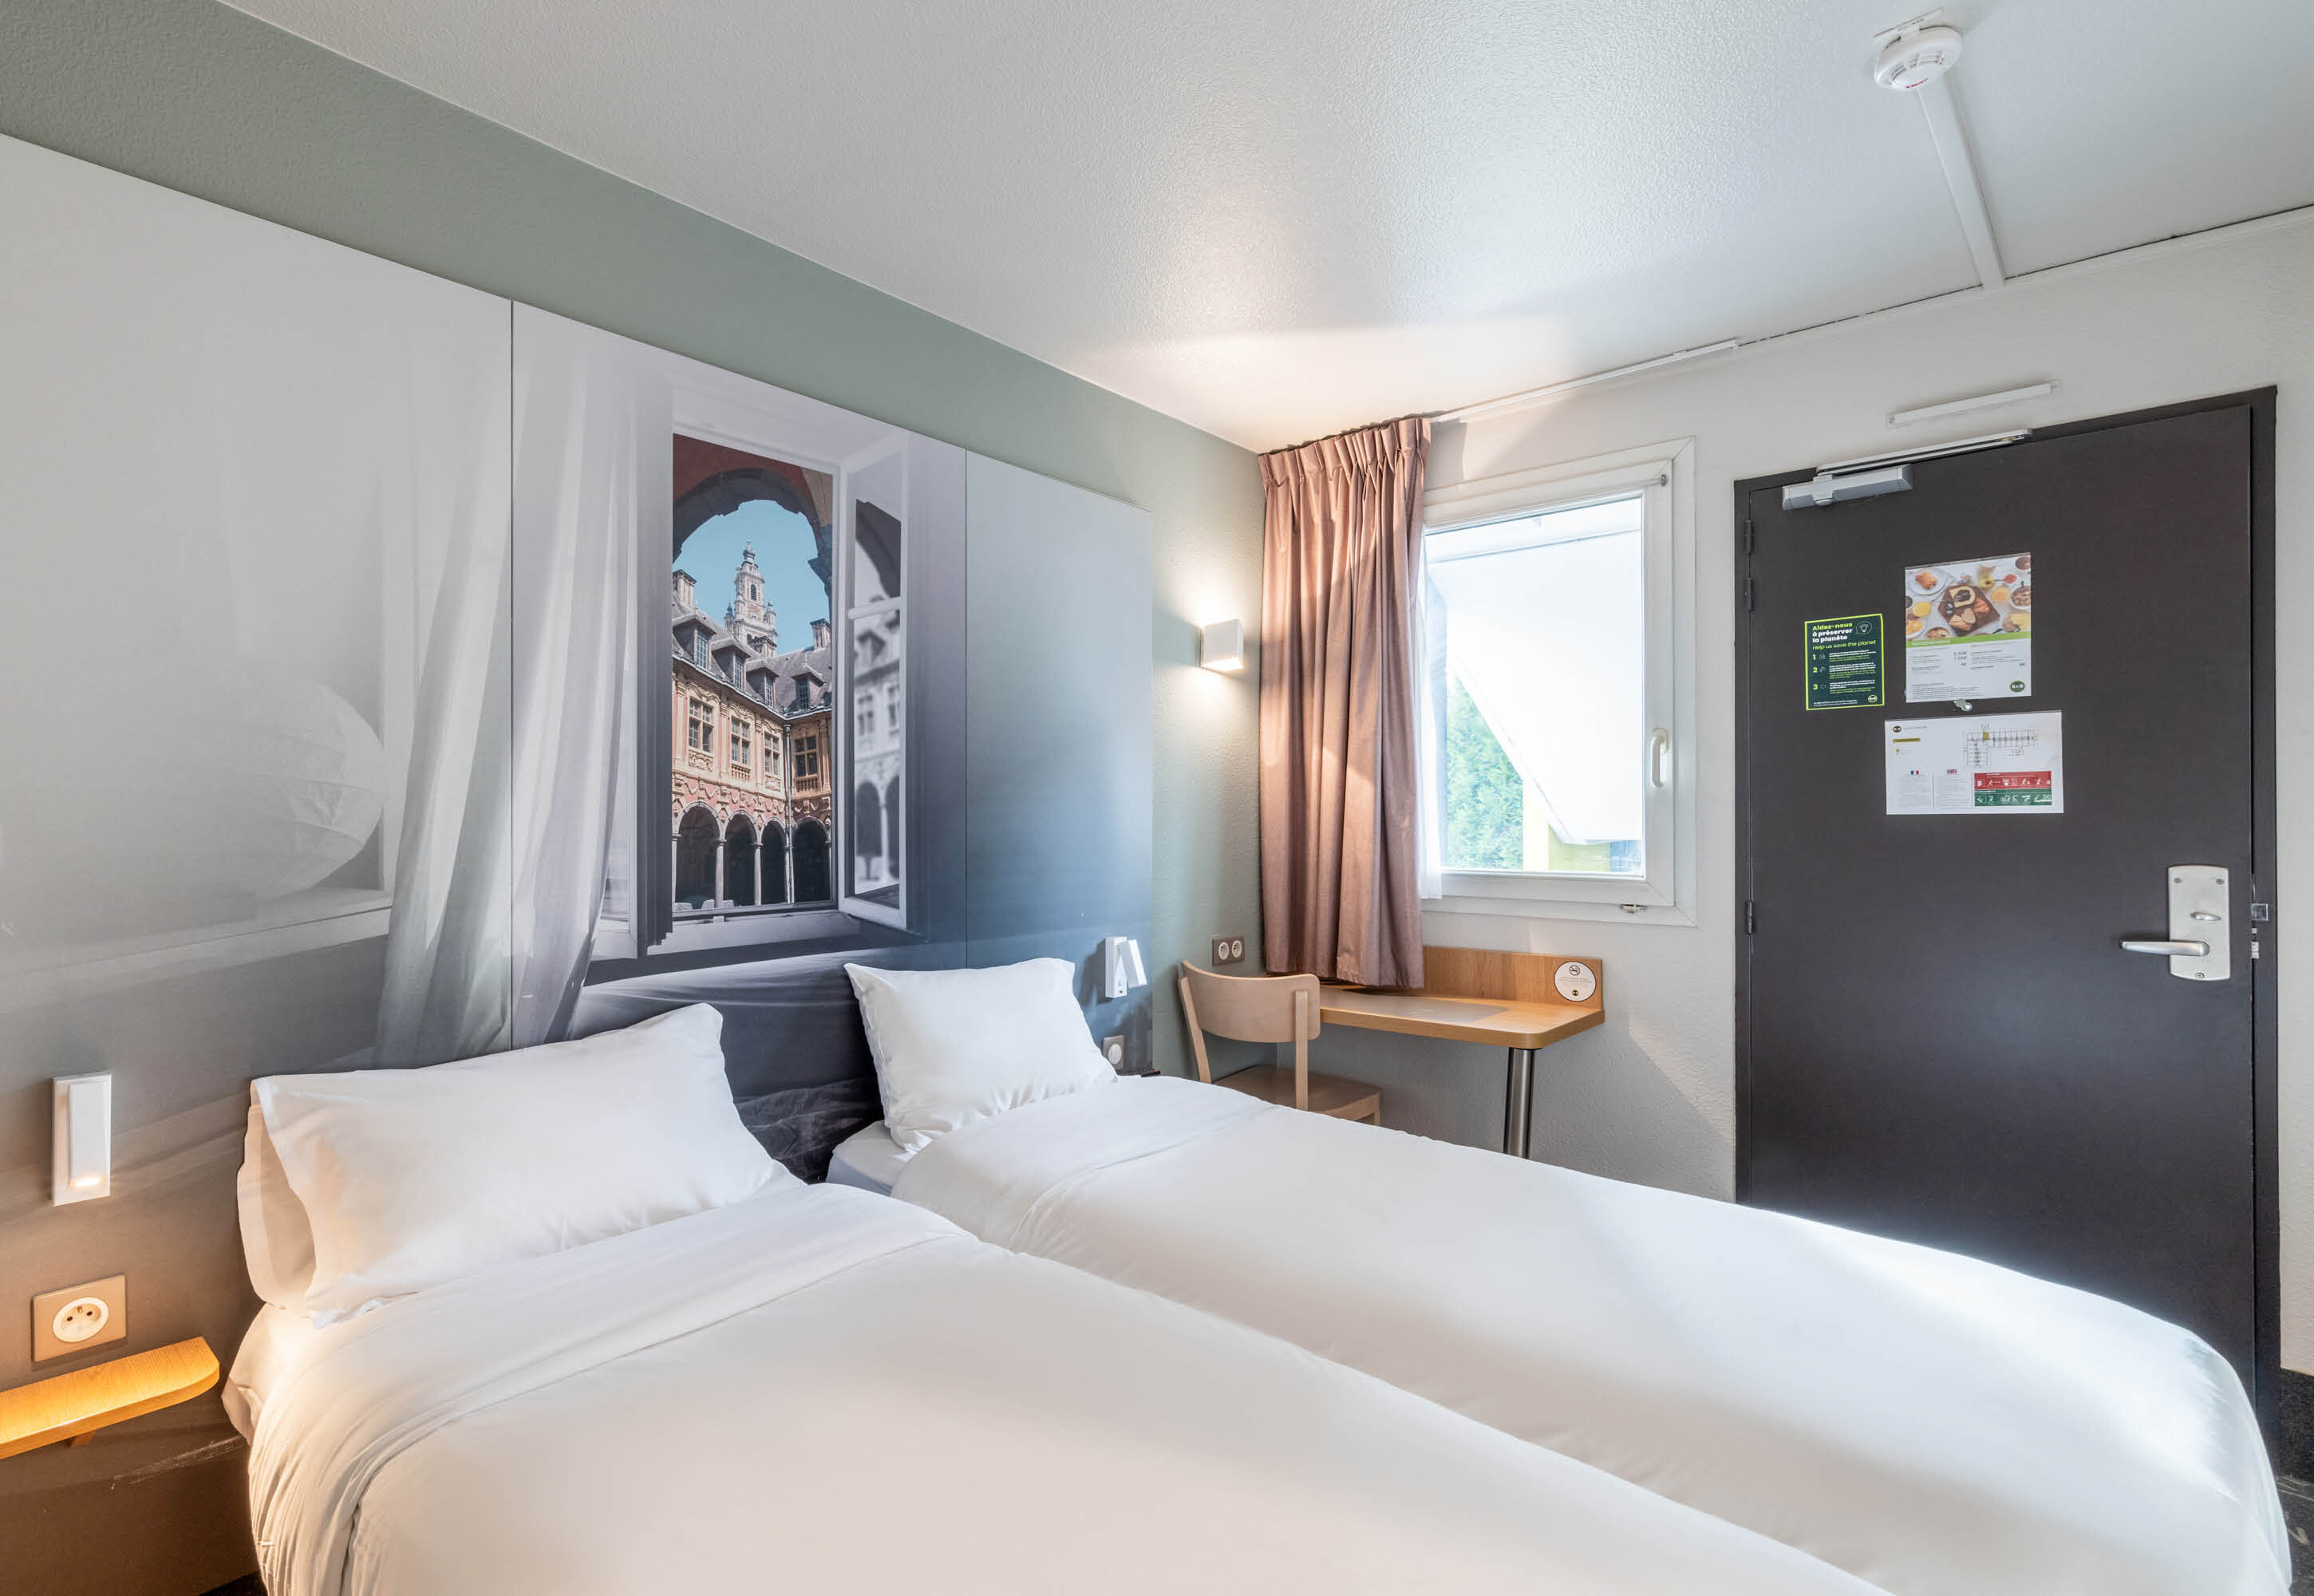 Images B&B HOTEL Lille Seclin Unexpo